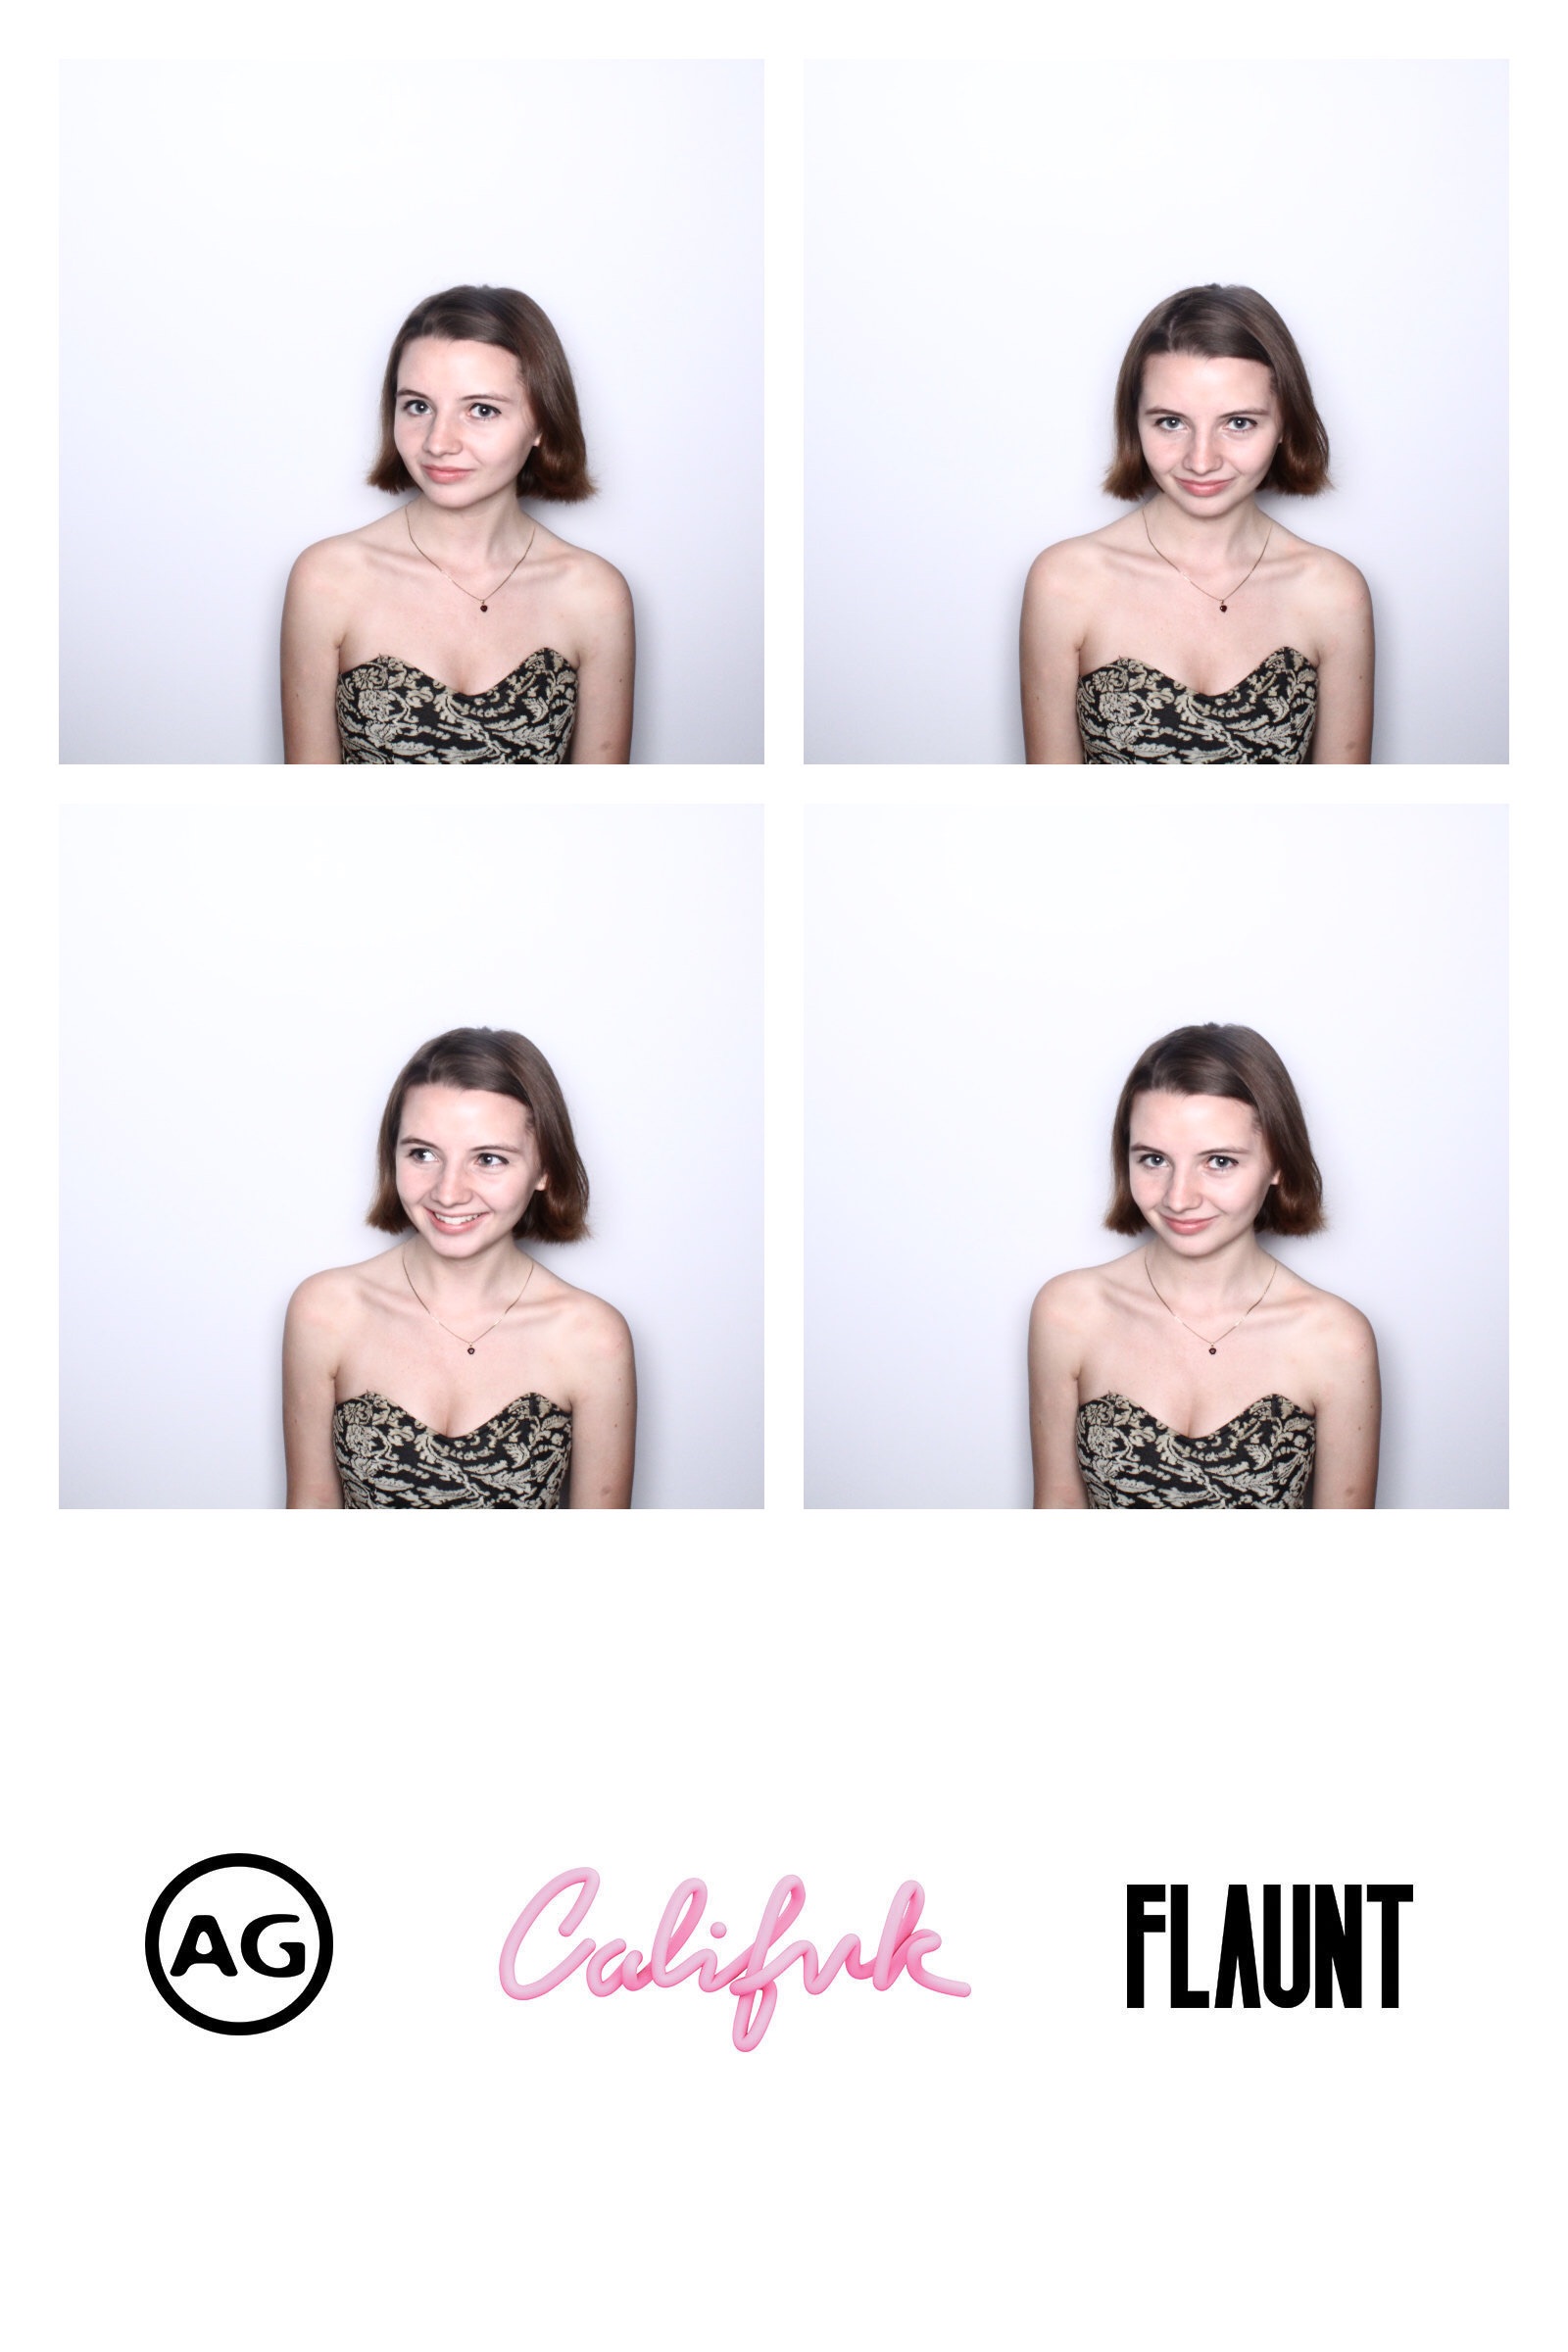 Parker Love Bowling attending Flaunt Magazine's Hollywood Roosevelt Hotel party for the CALIFUK issue OCT. 14th 2015